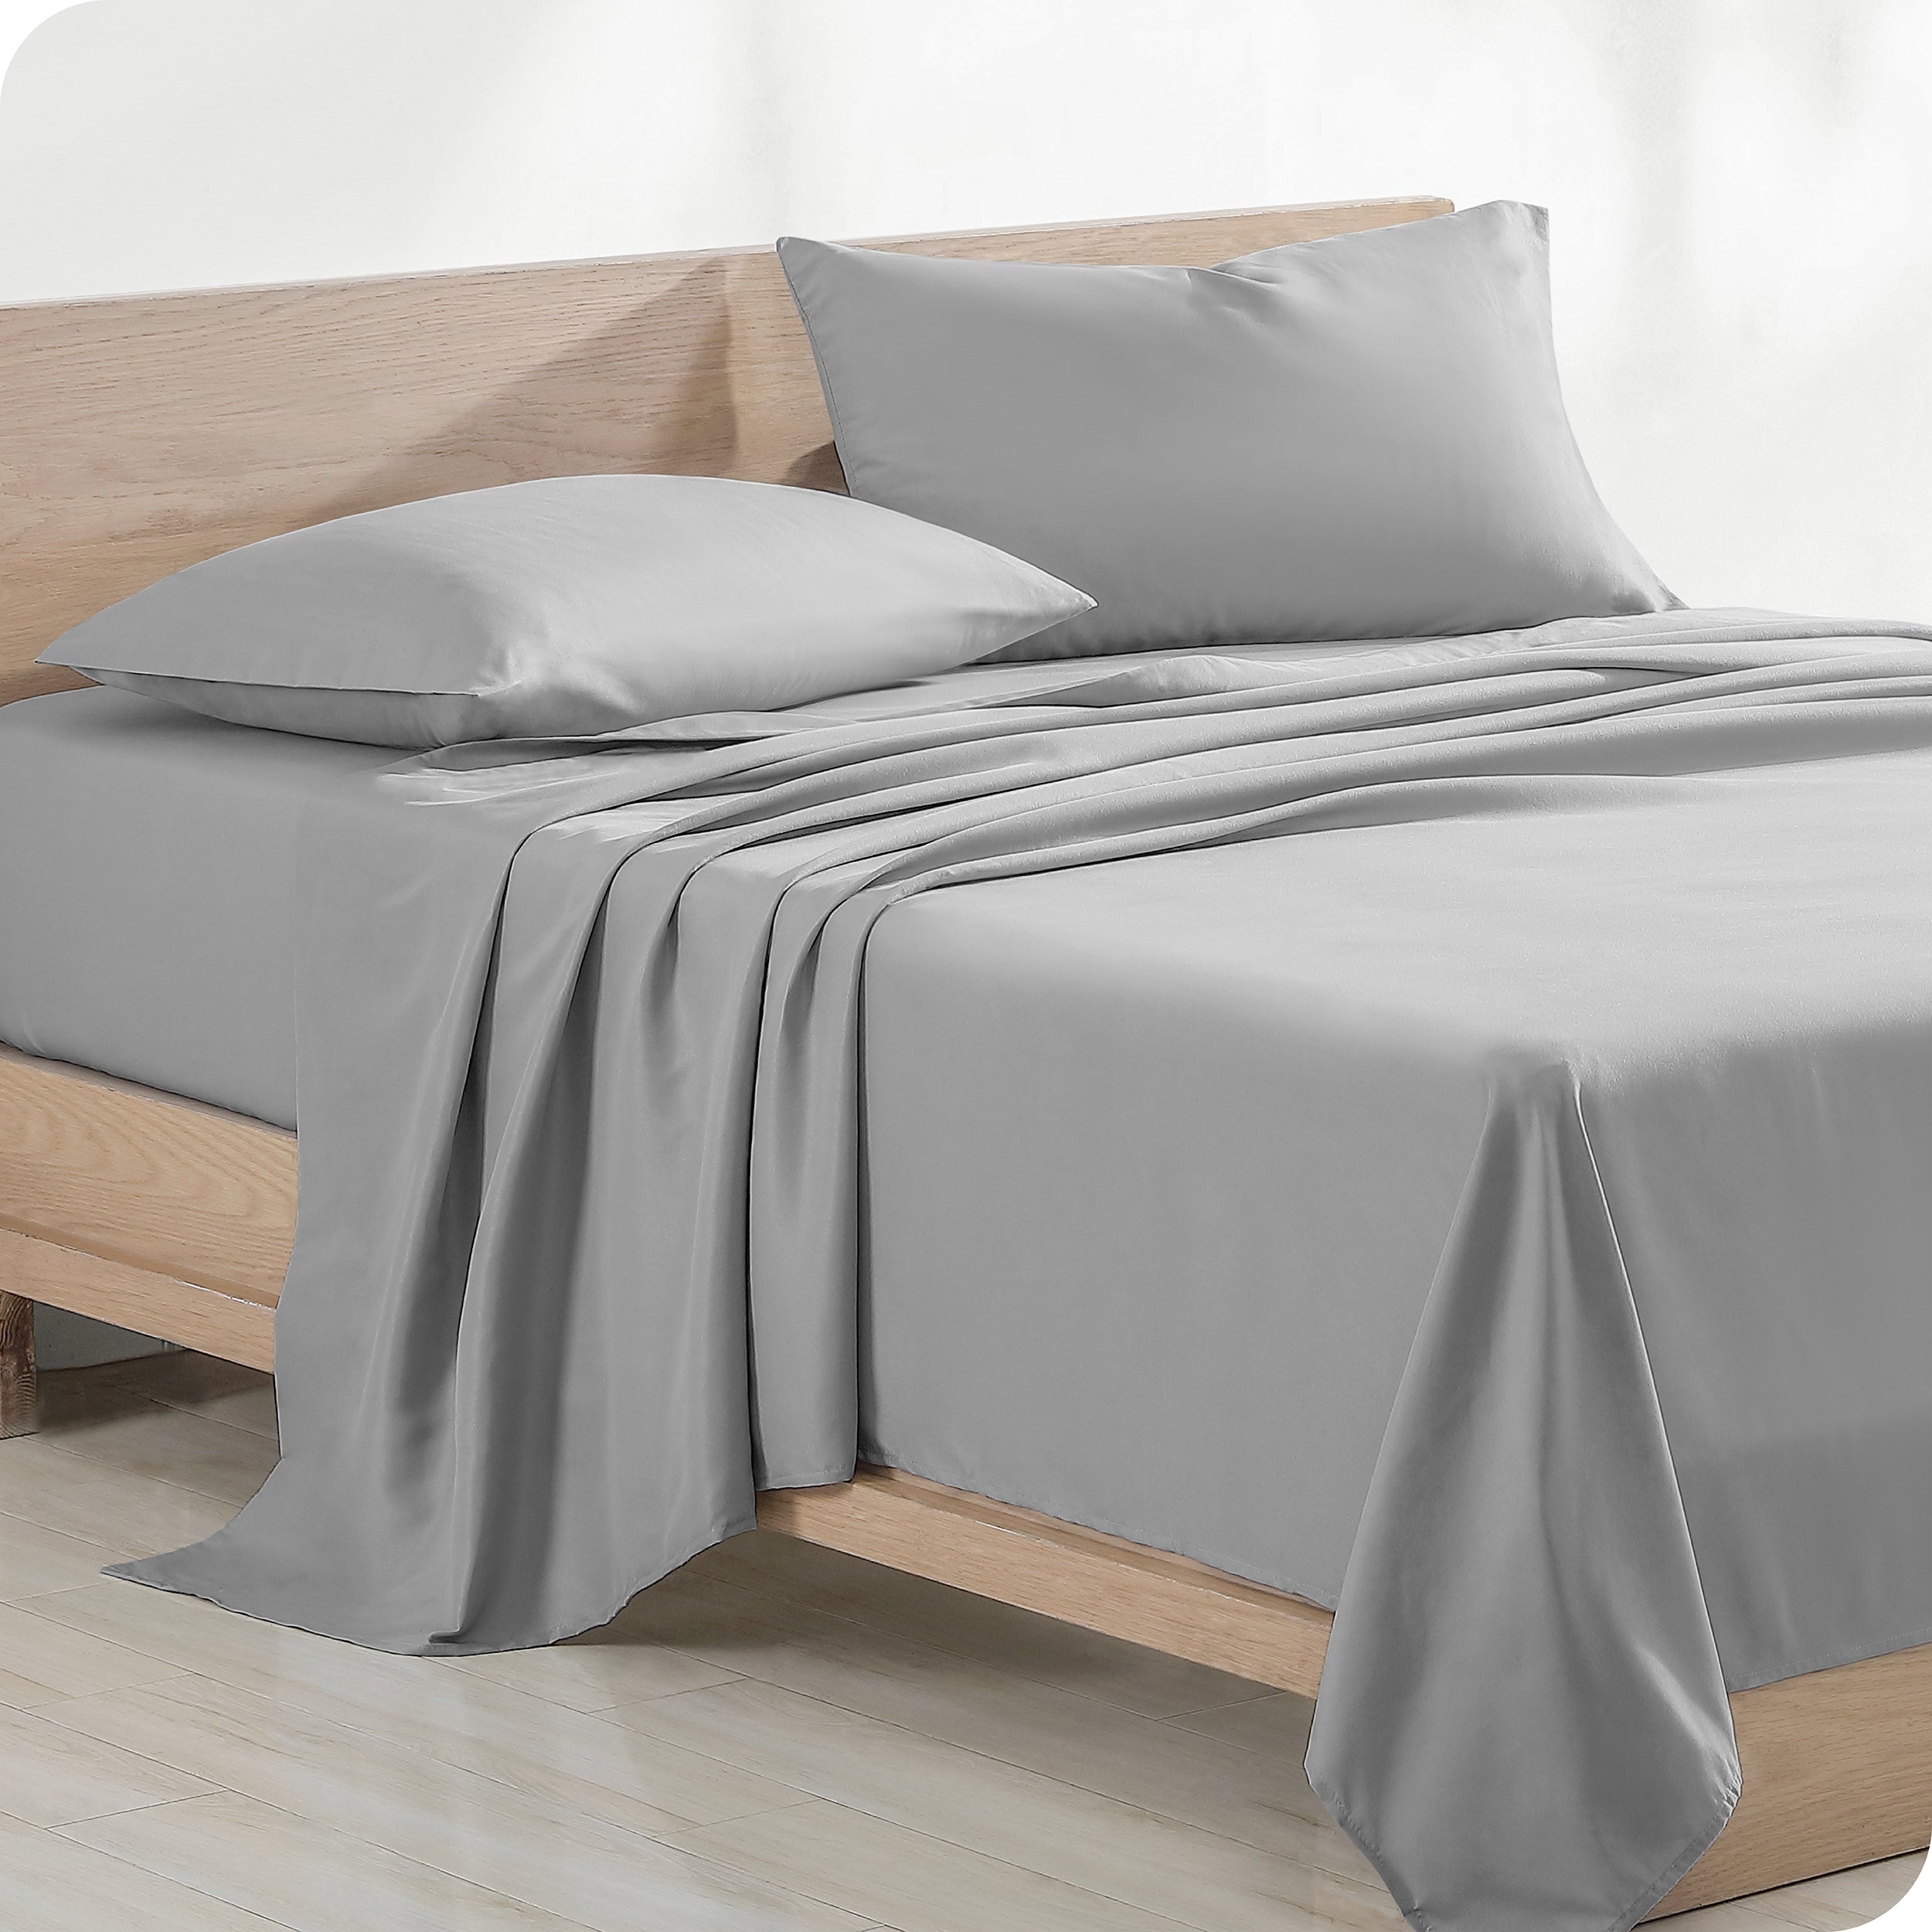 Diagonal view of modern wood bed with sheets and pillows